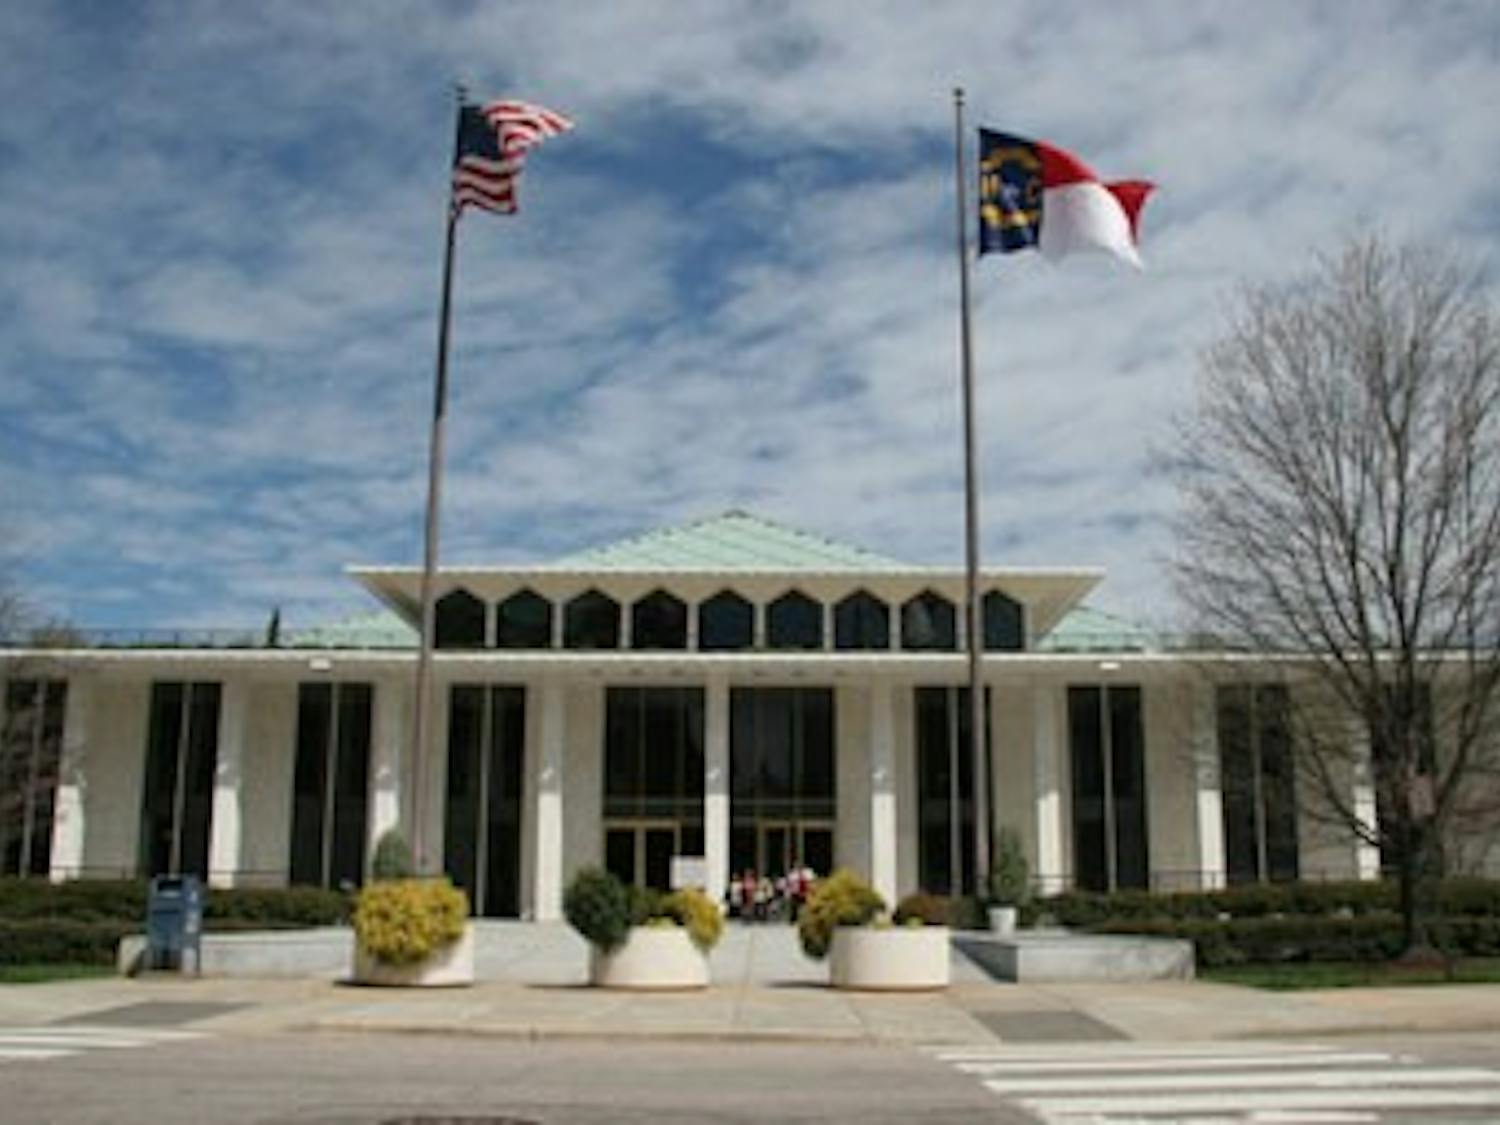 The Legislative Building located in Raleigh houses North Carolina's General Assembly. Republicans fell one seat shy of a veto-proof supermajority in the N.C. House in the 2022 midterm election.